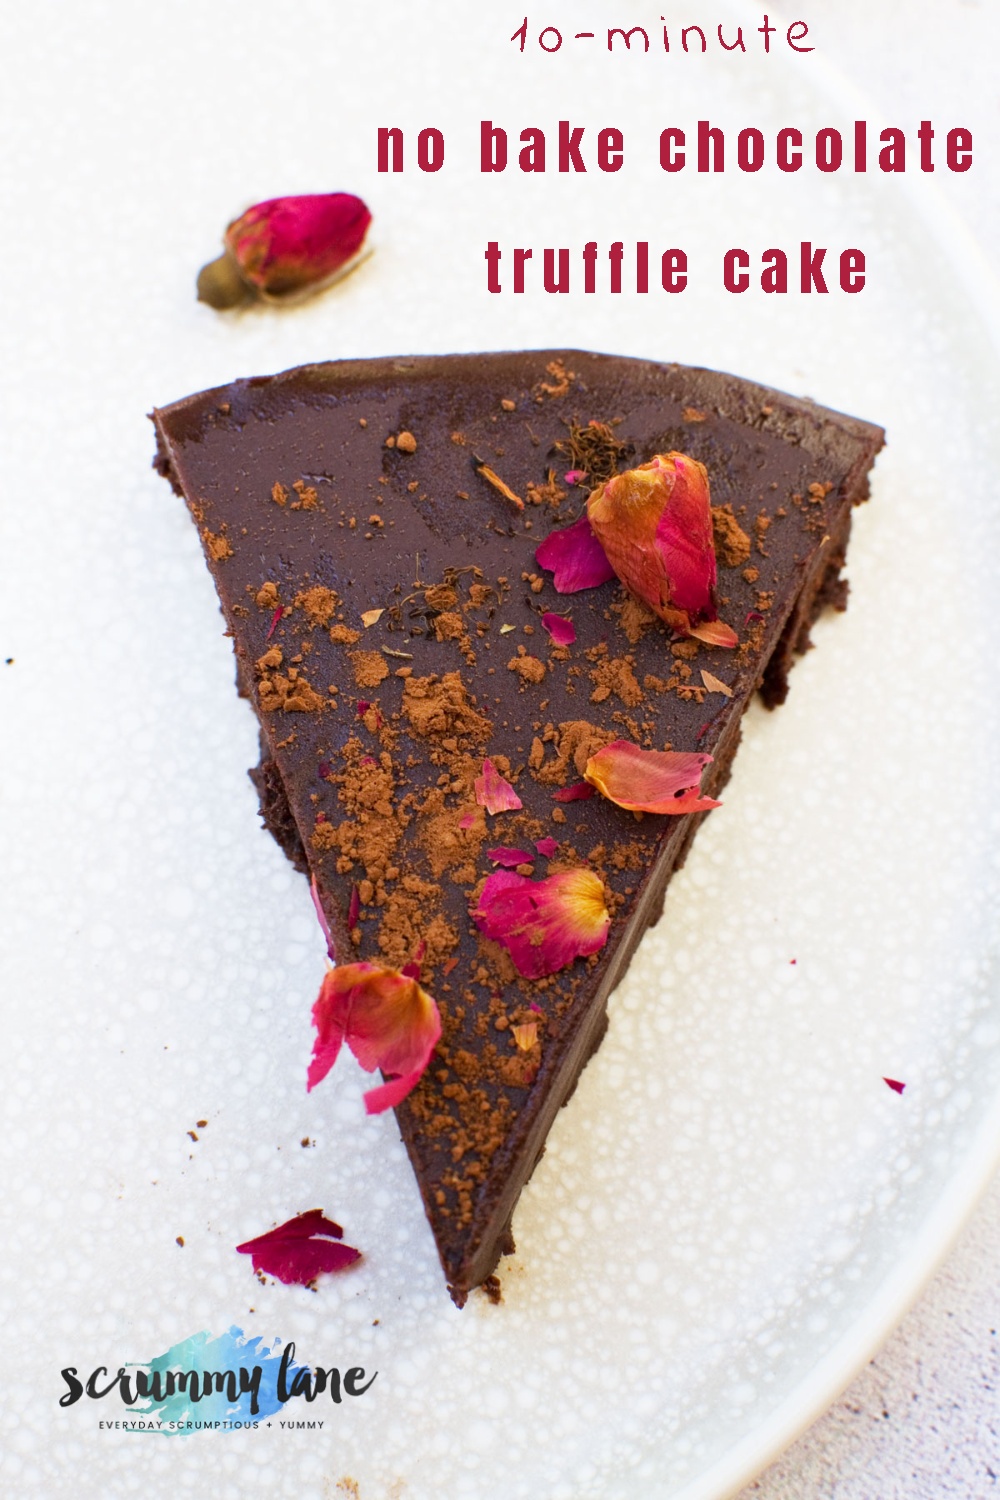 Slice of no bake chocolate truffle cake from above with title text on it